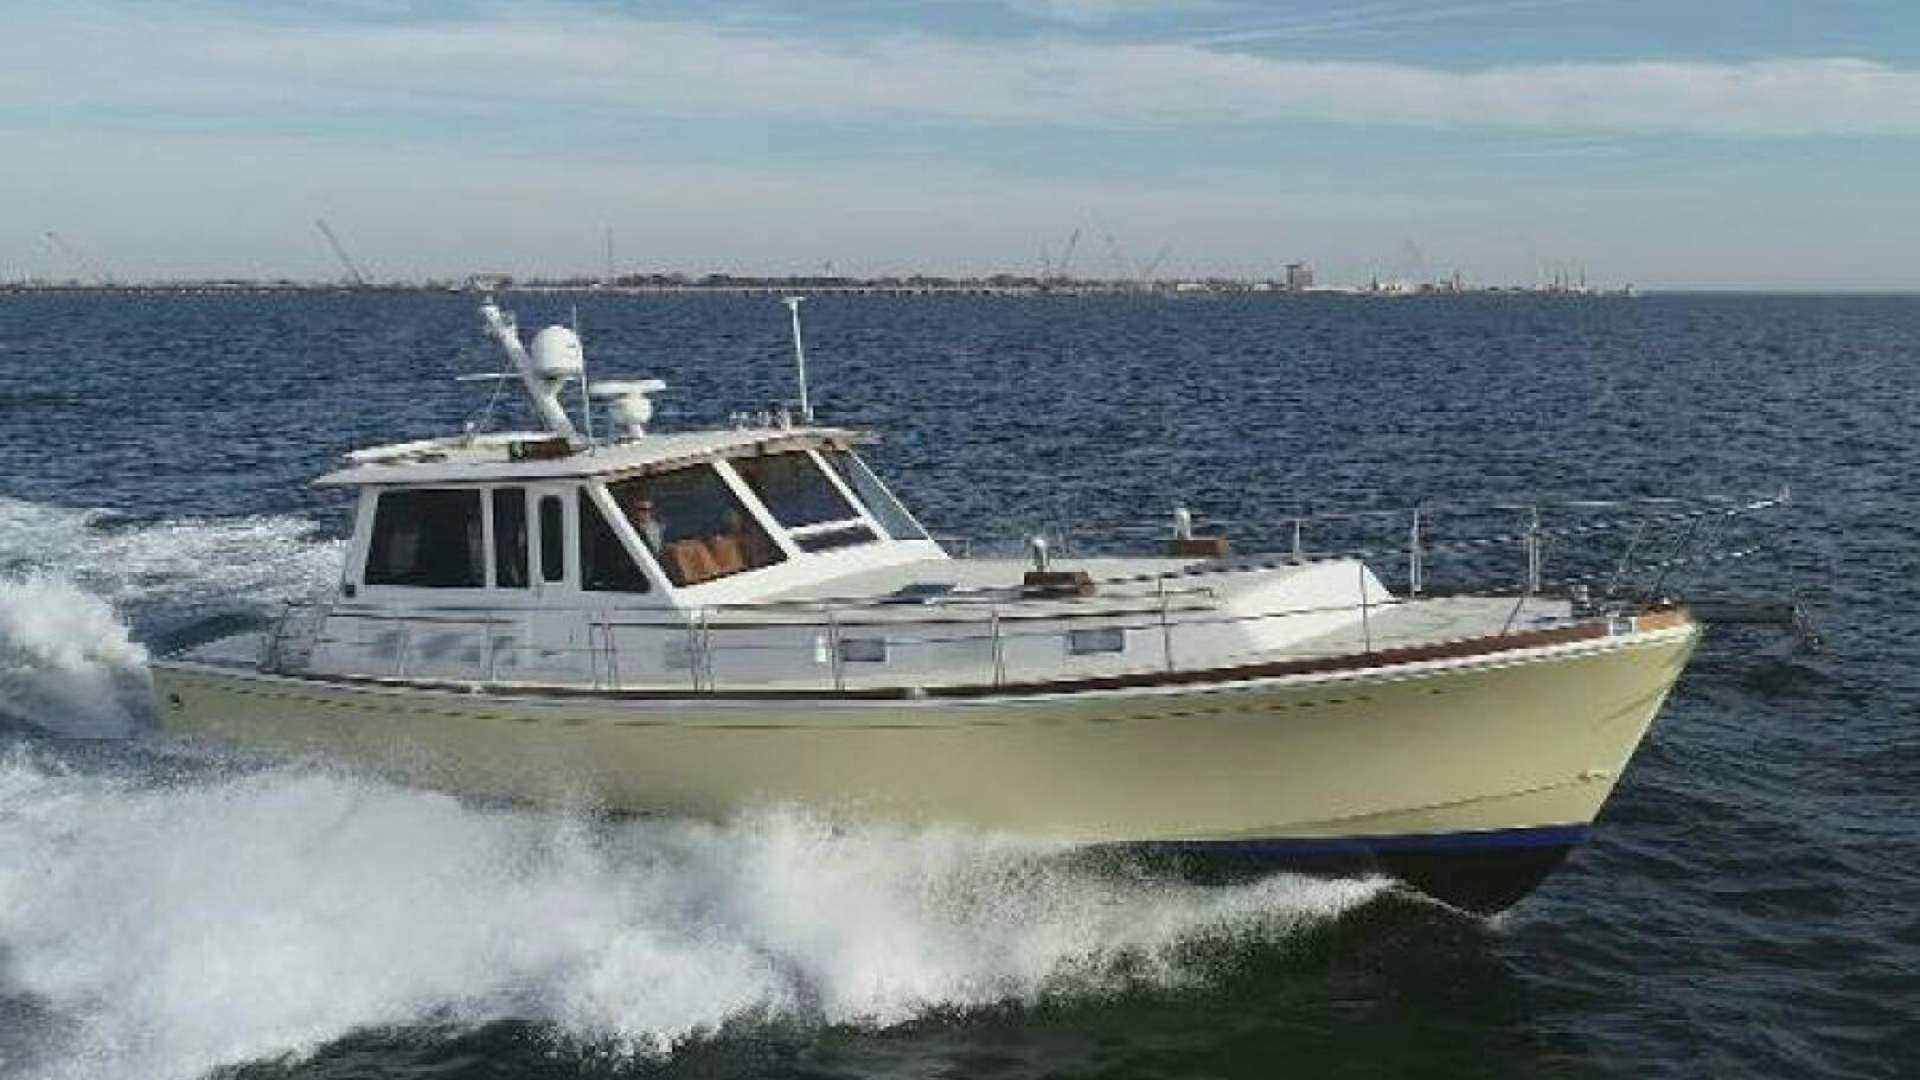 Beautiful day
Yacht for Sale